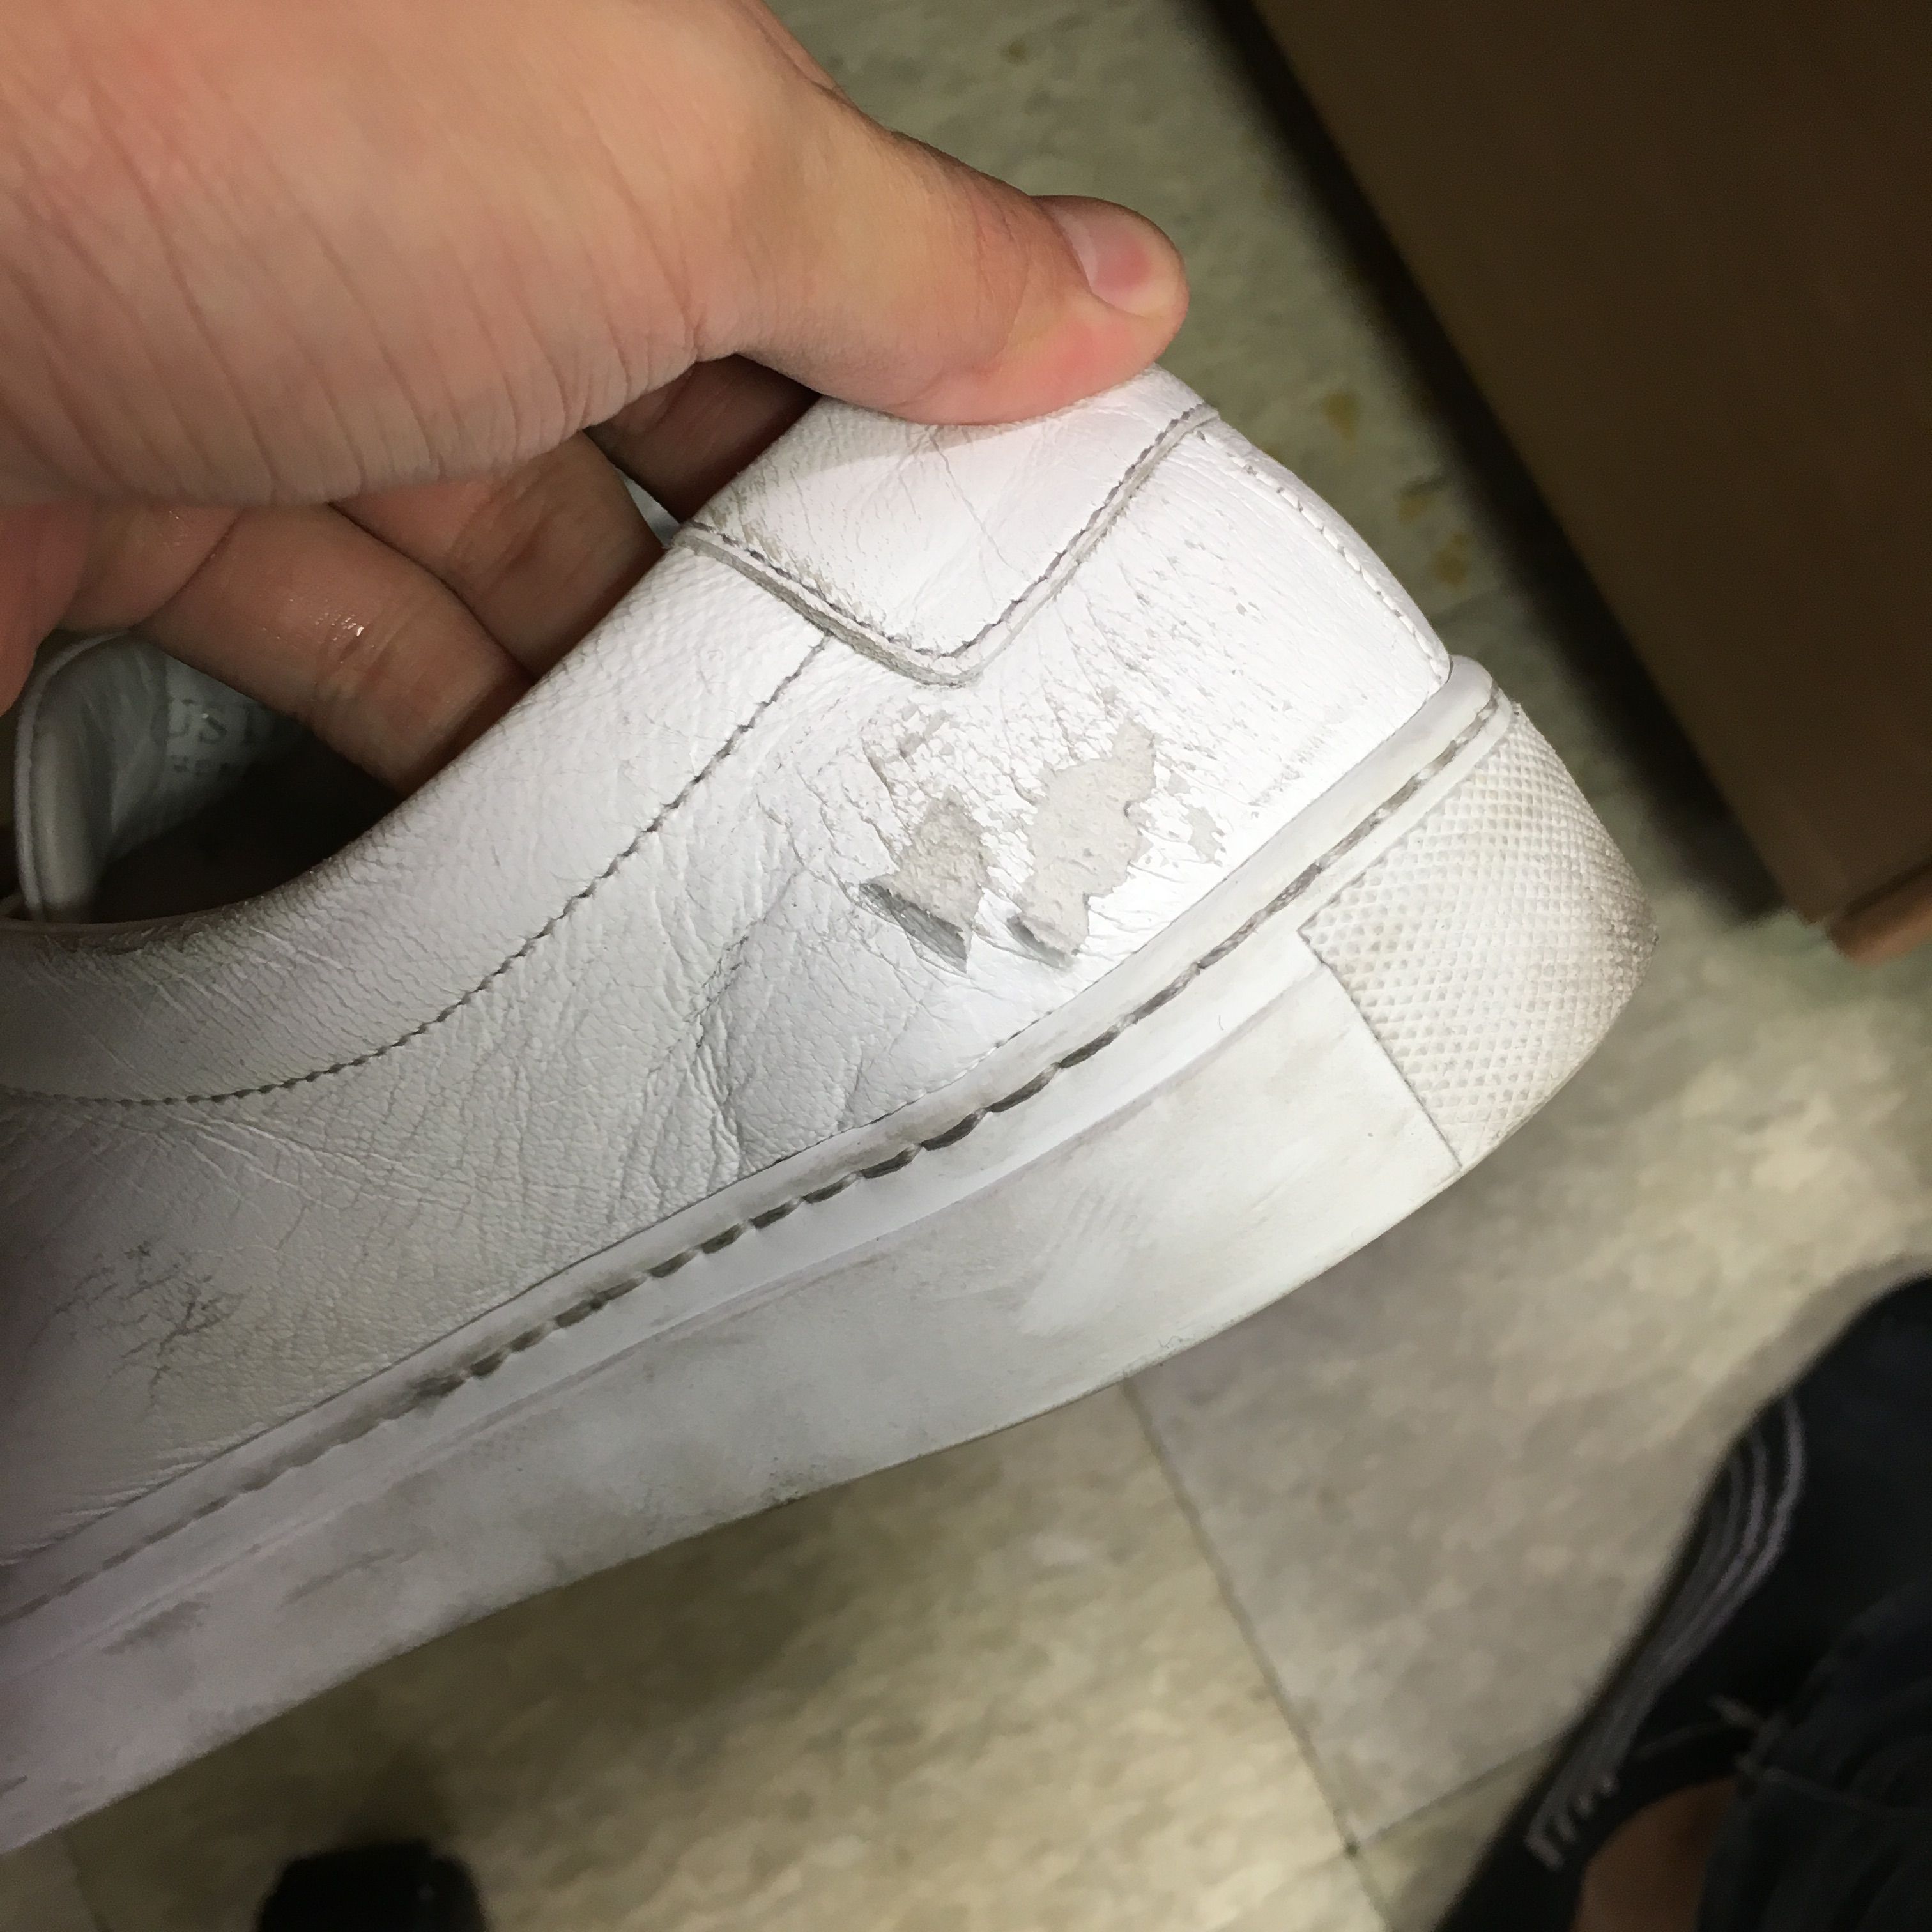 Need Advice: How to fix peeling leather of my new gustin sneakers |  Styleforum